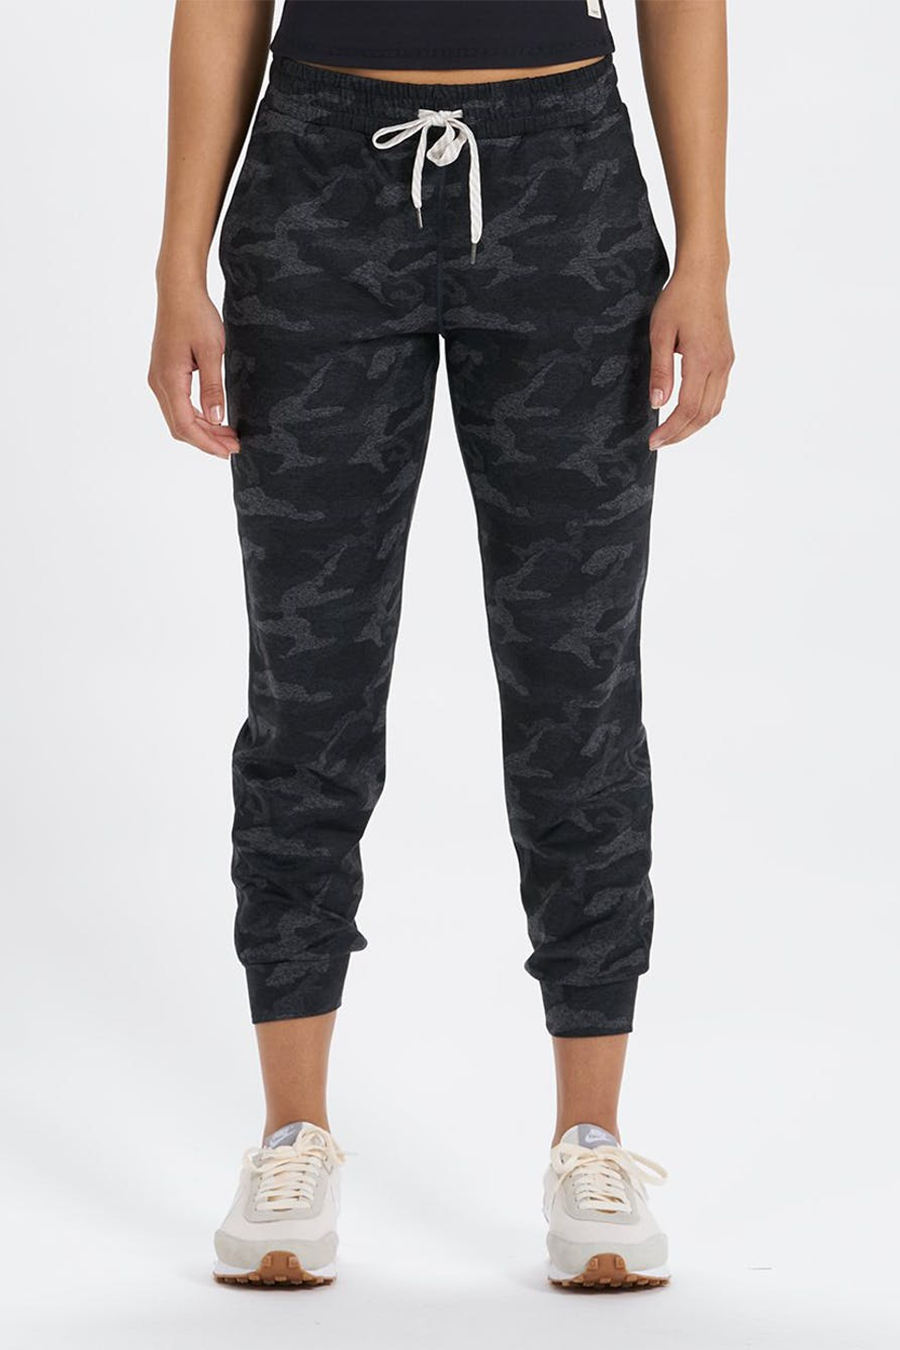 Performance Jogger | Black Camo - Main Image Number 1 of 2